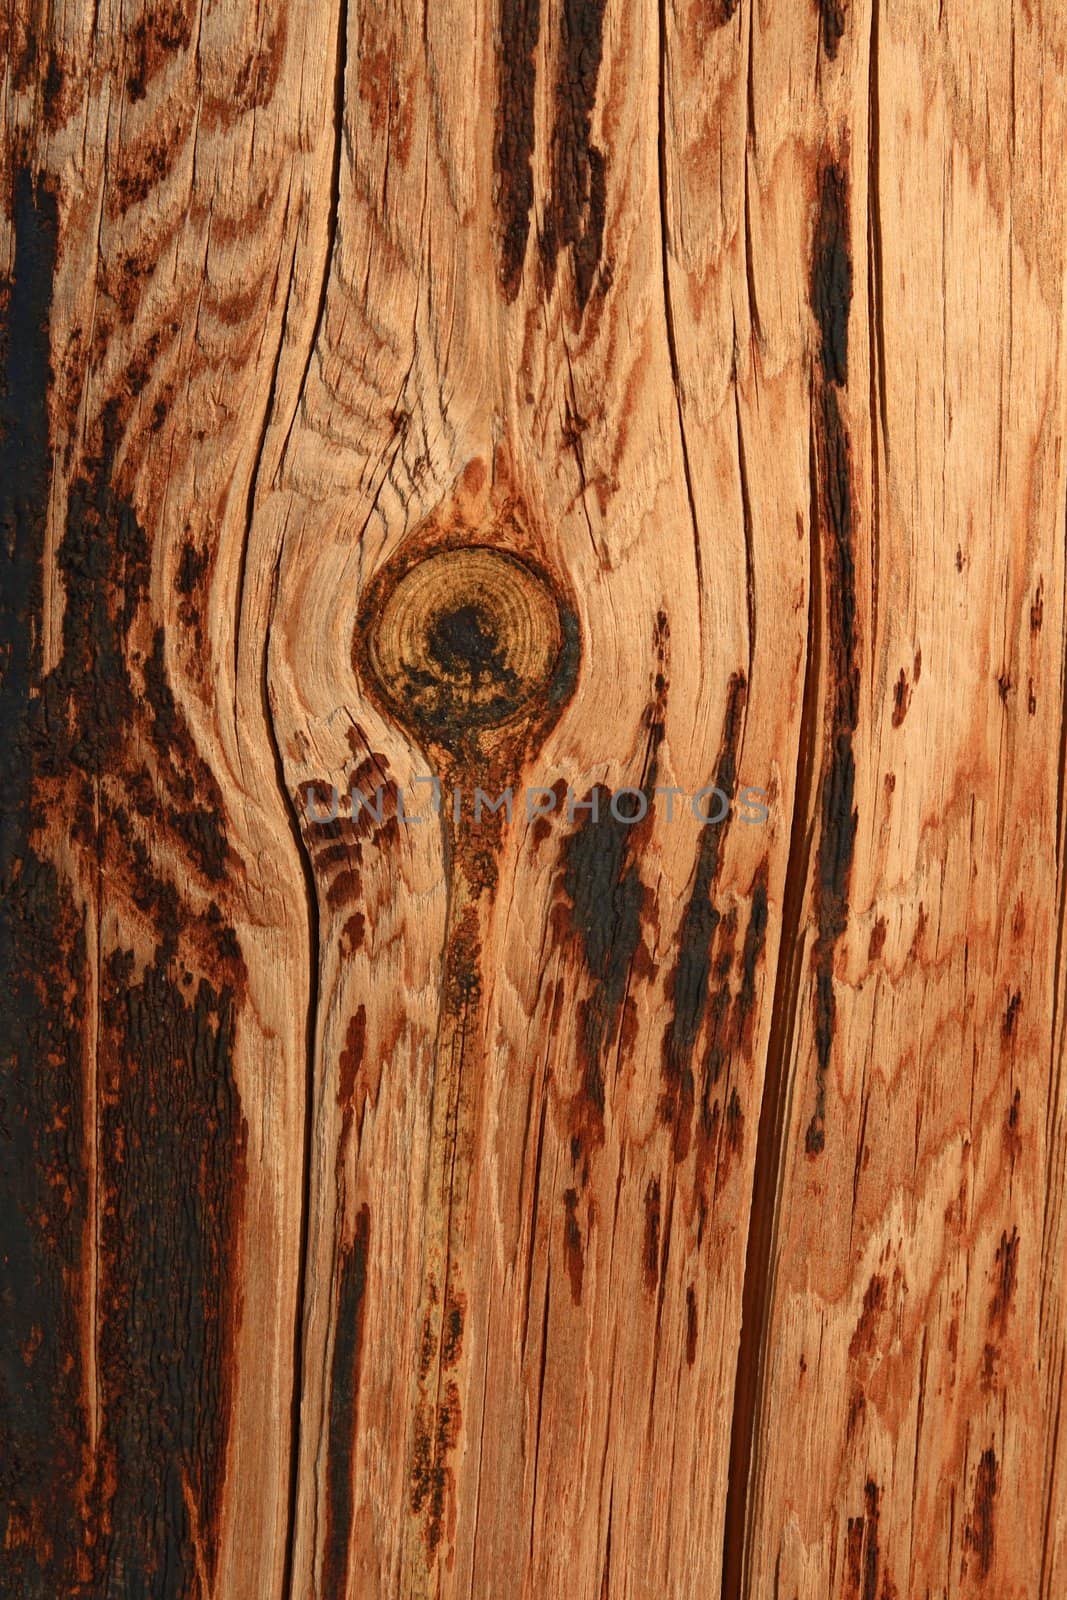 Burnt knotty wood background in warm colors.